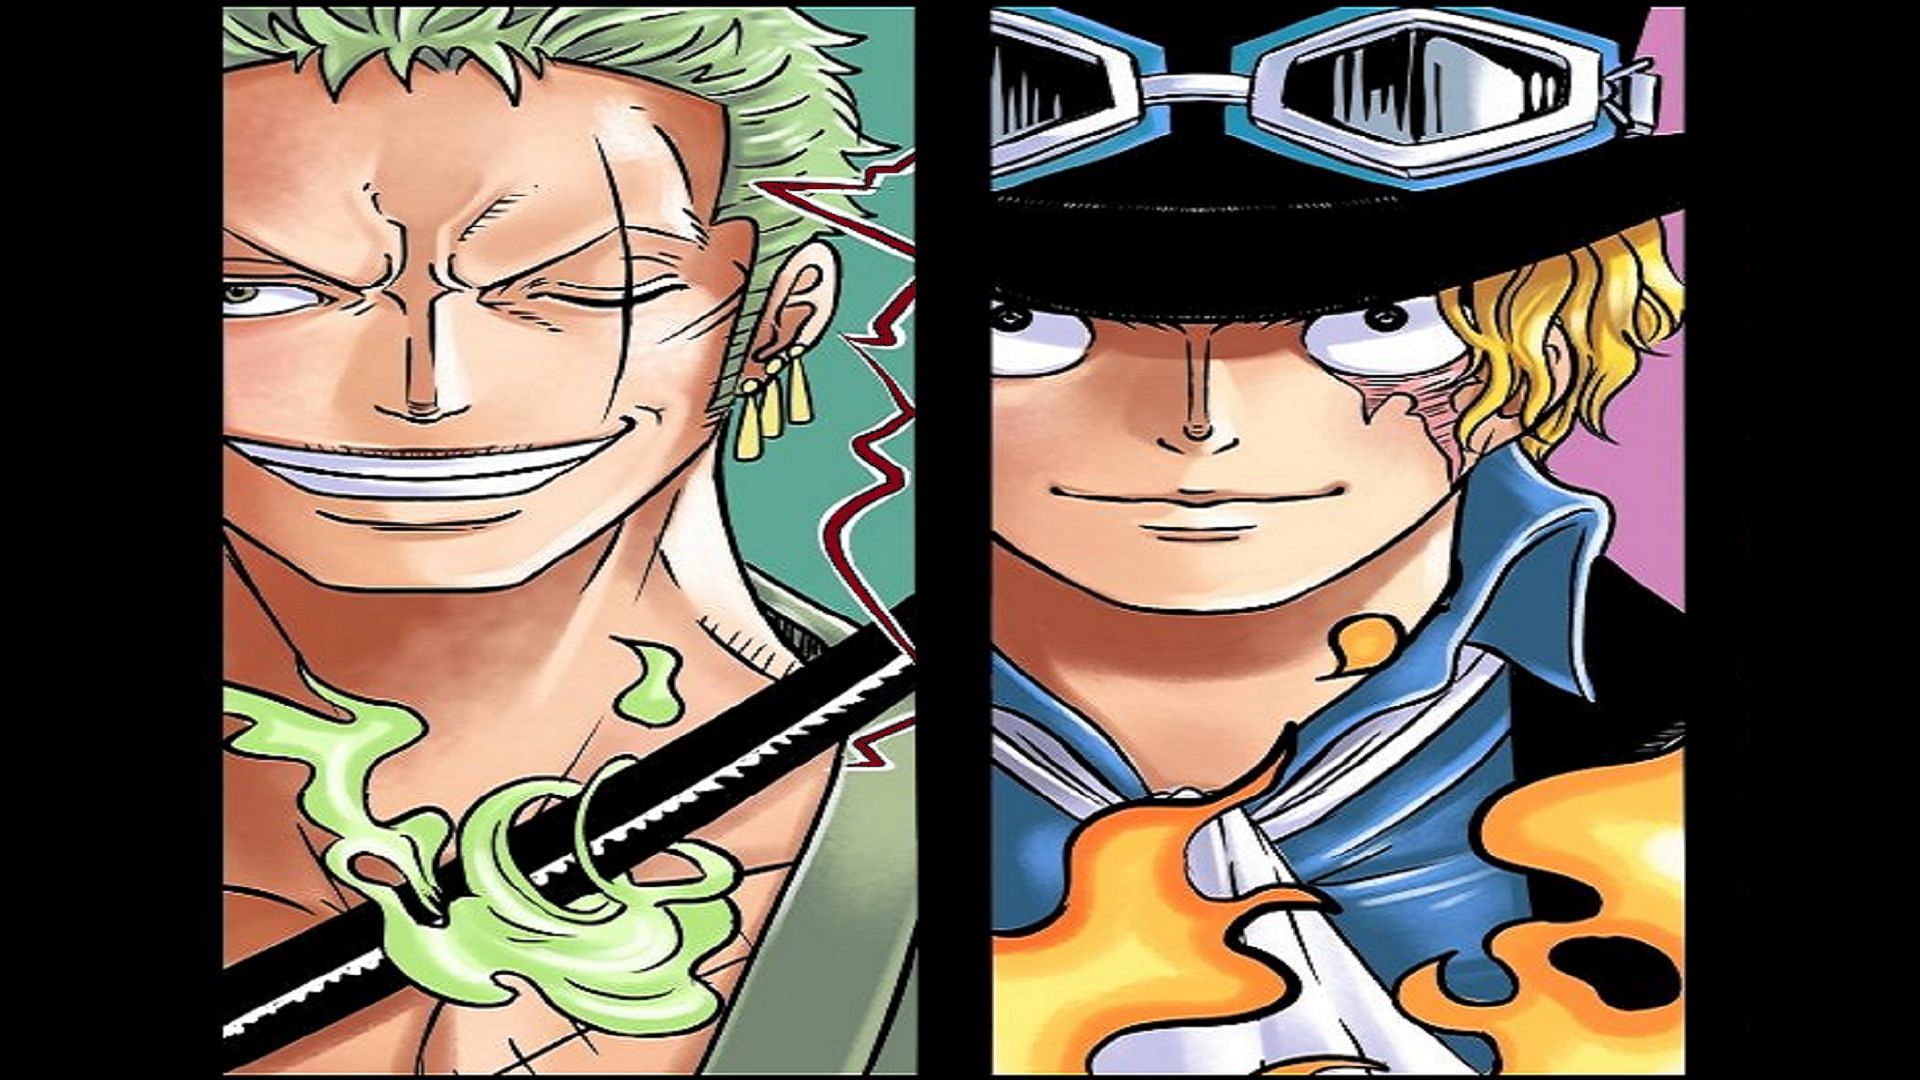 Both Zoro and Sabo are not only powerful fighters, but brotherly figures to Luffy (Image via Eiichiro Oda/Shueisha, One Piece)